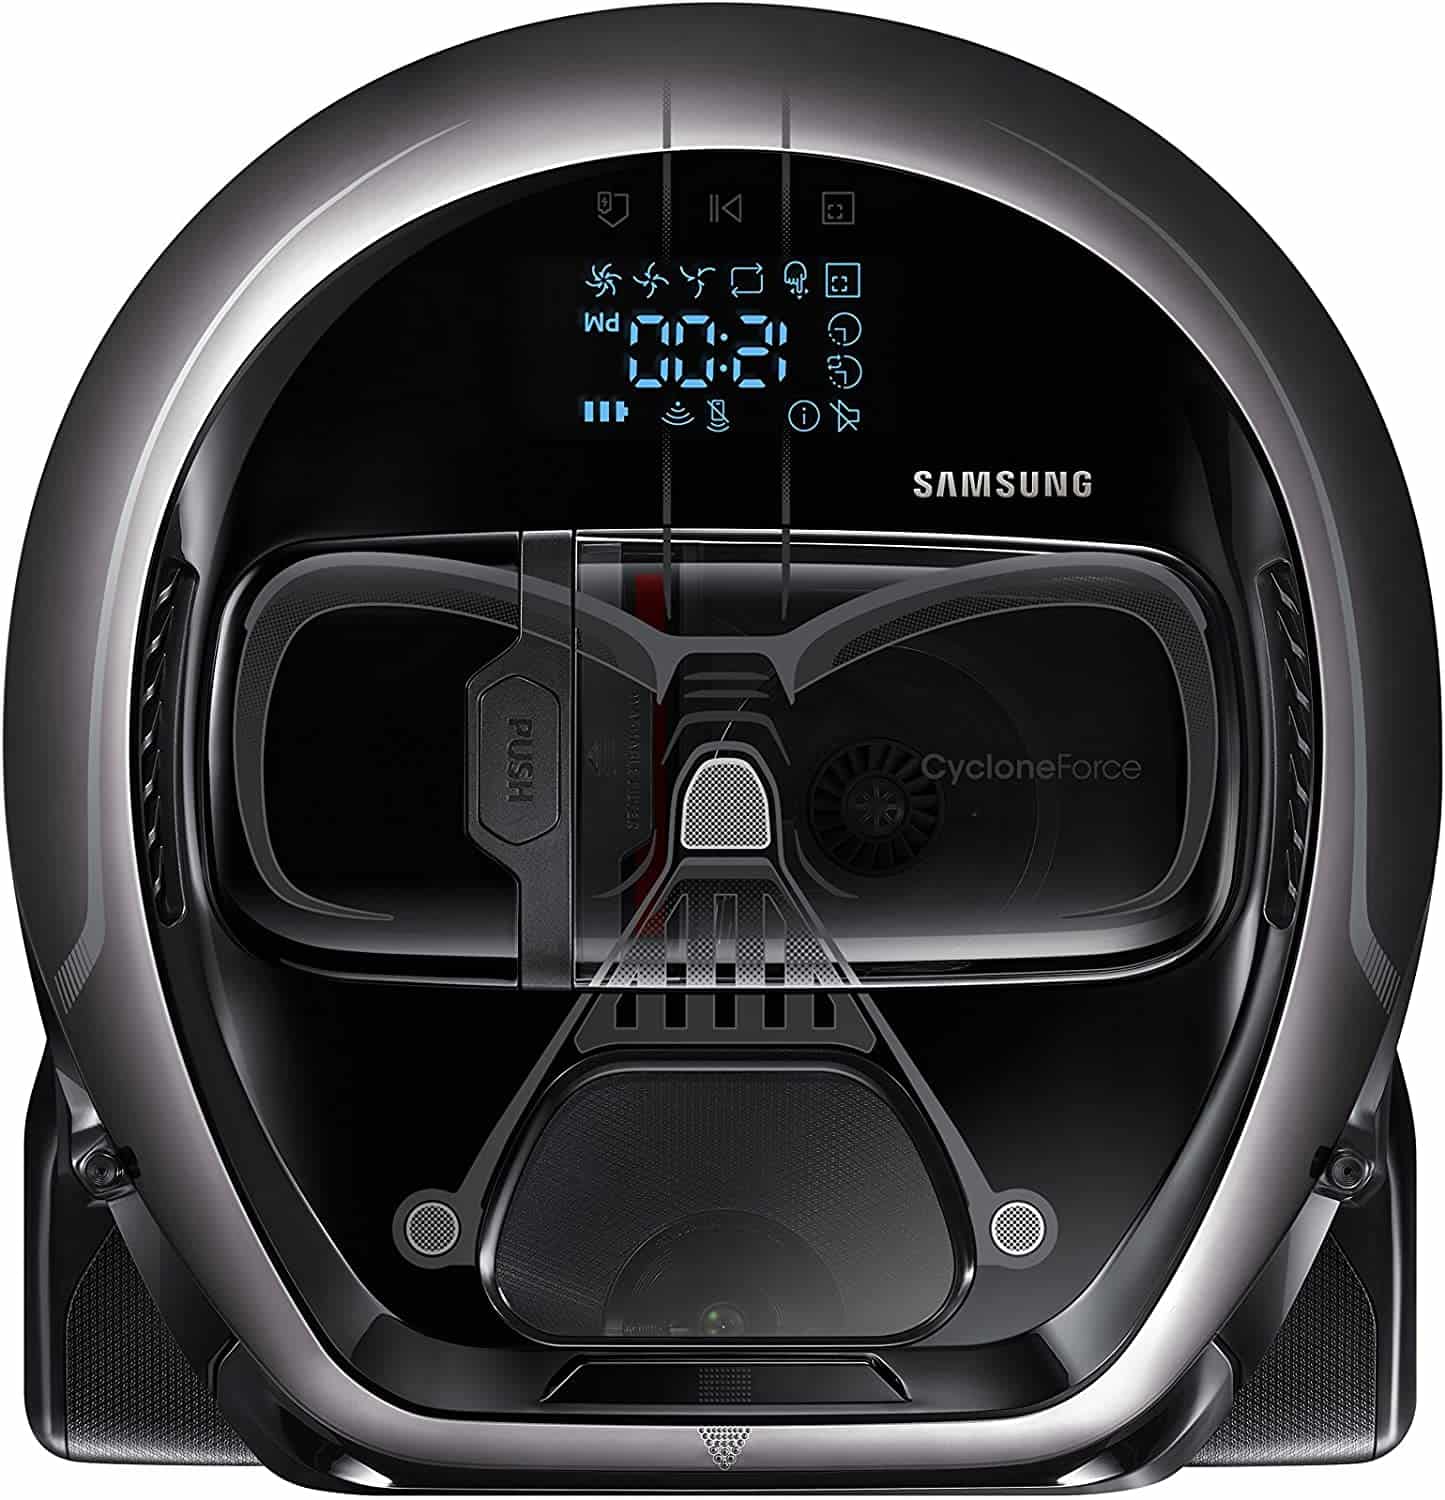 Cool Star Wars Droid vacuum: Samsung POWERbot Limited Edition